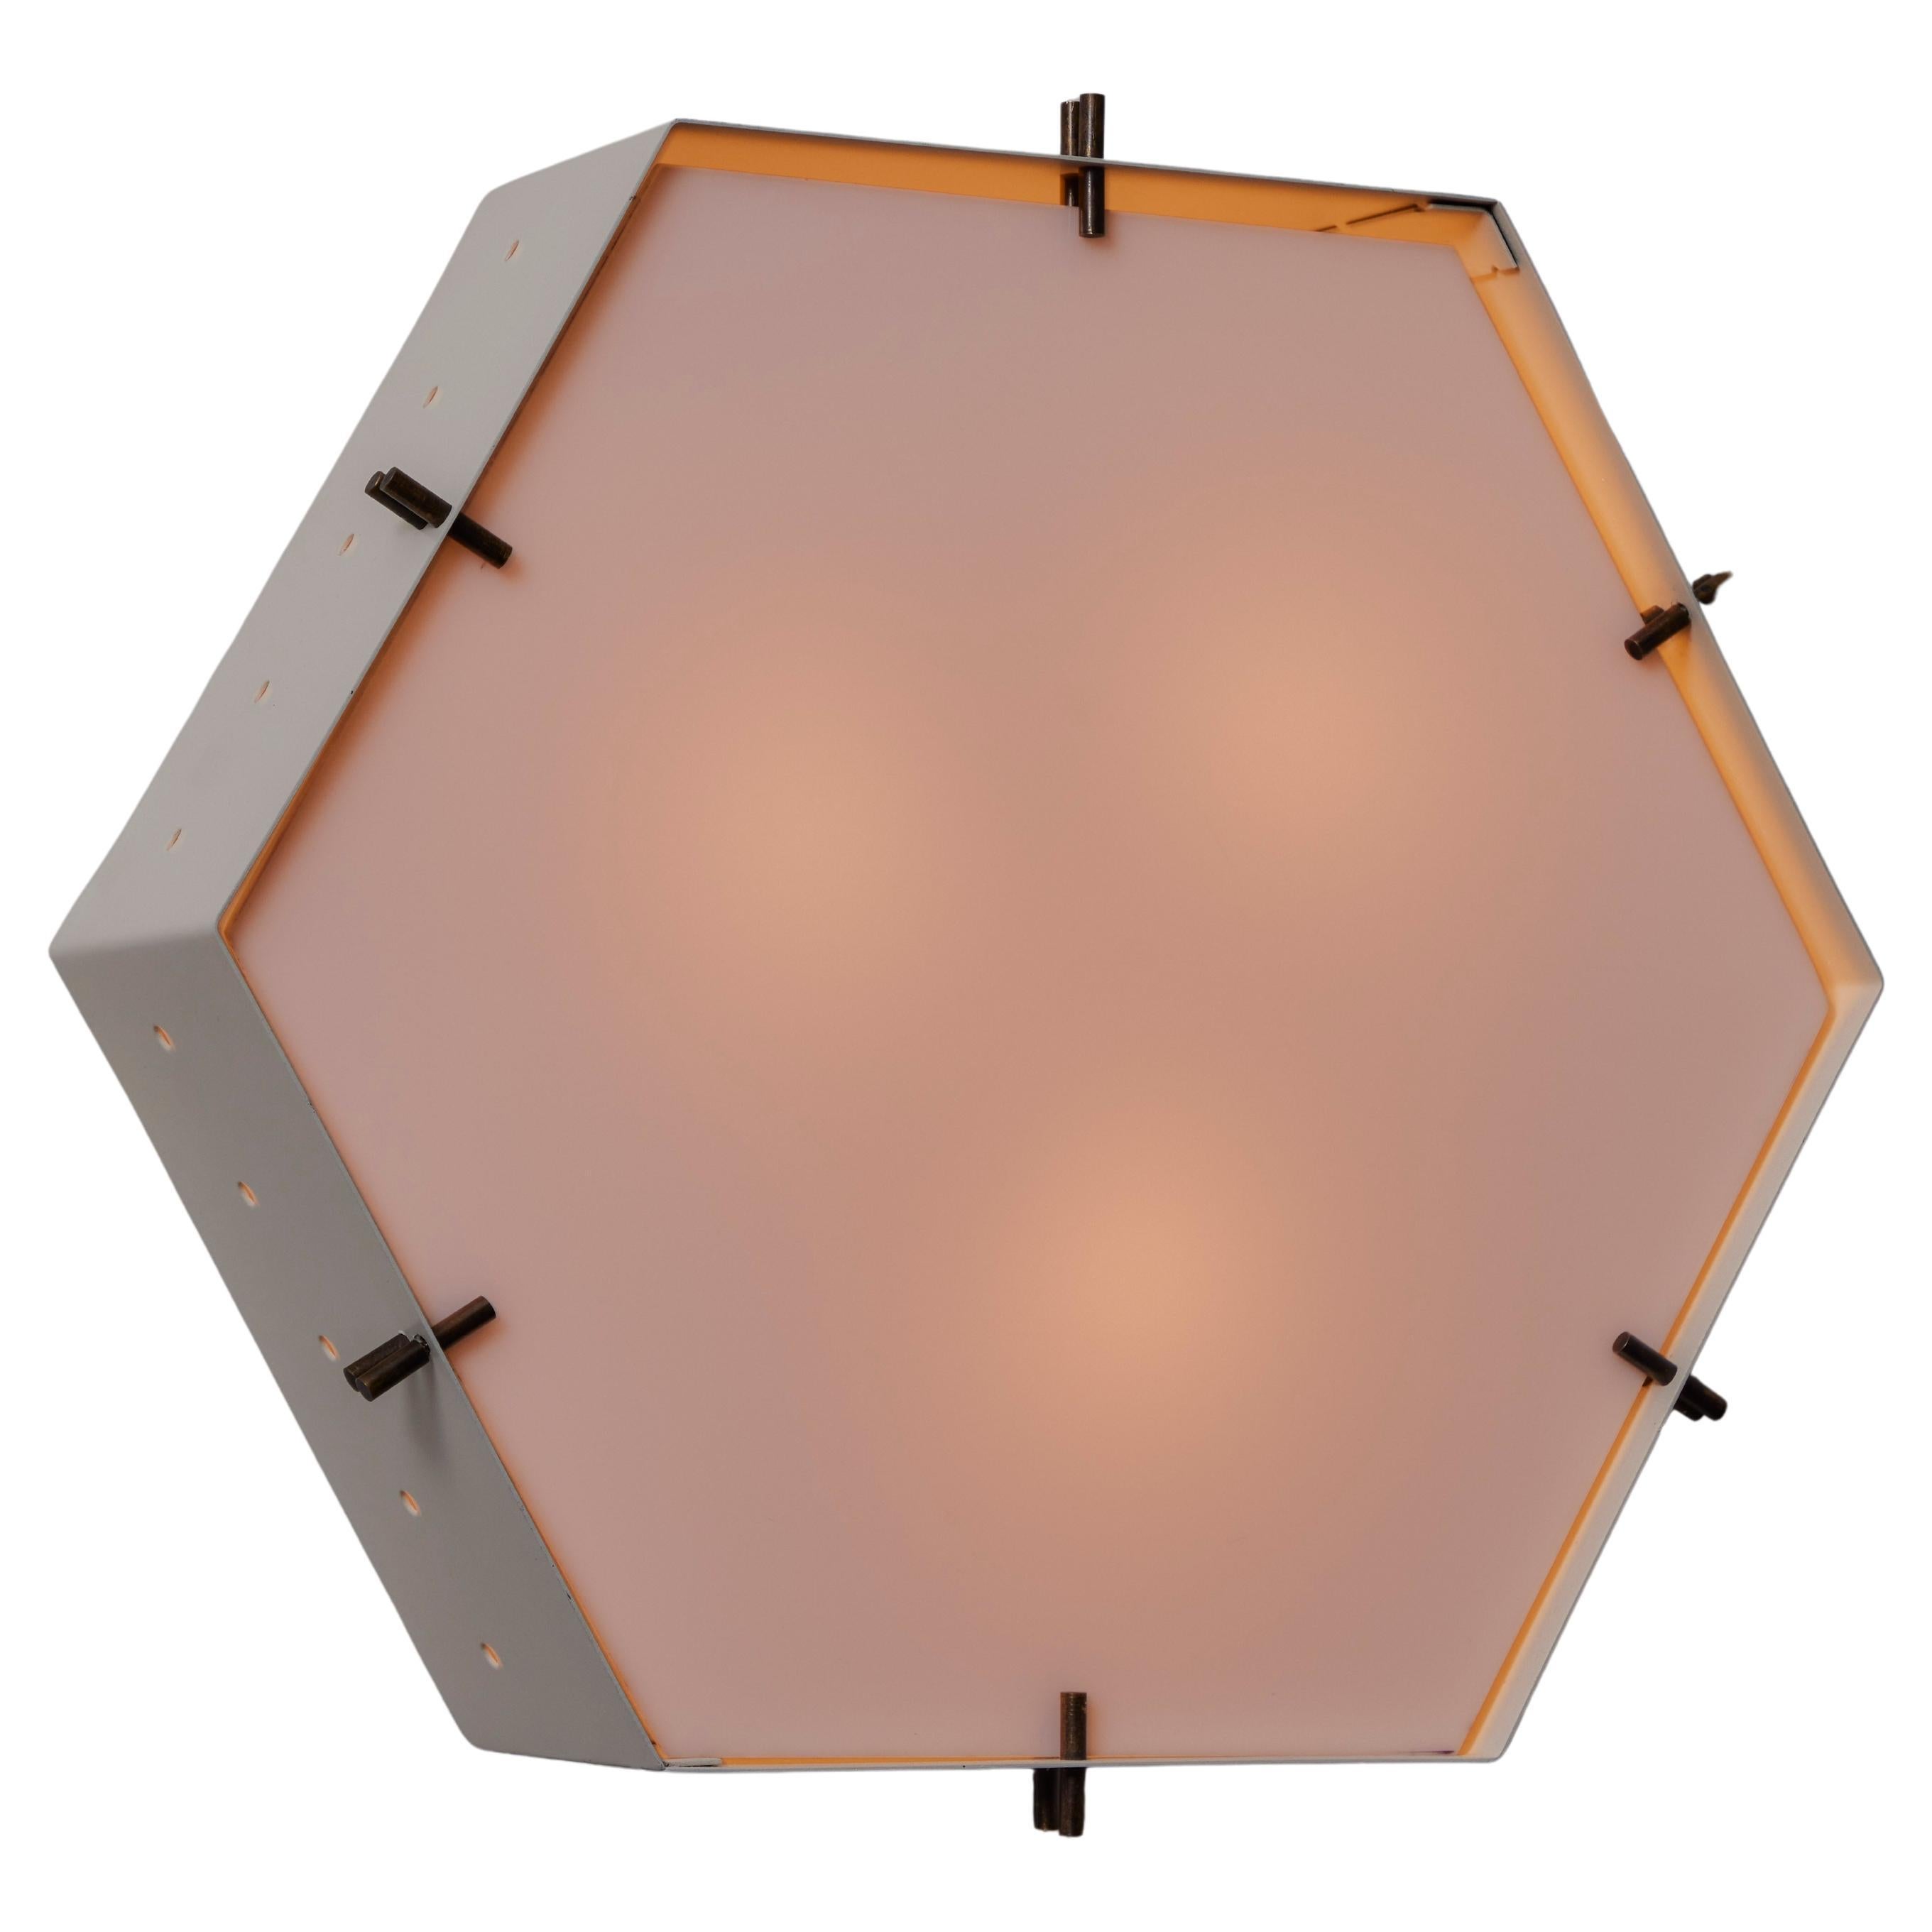 Single Small Wall or Ceiling Light by G.C.M.E.